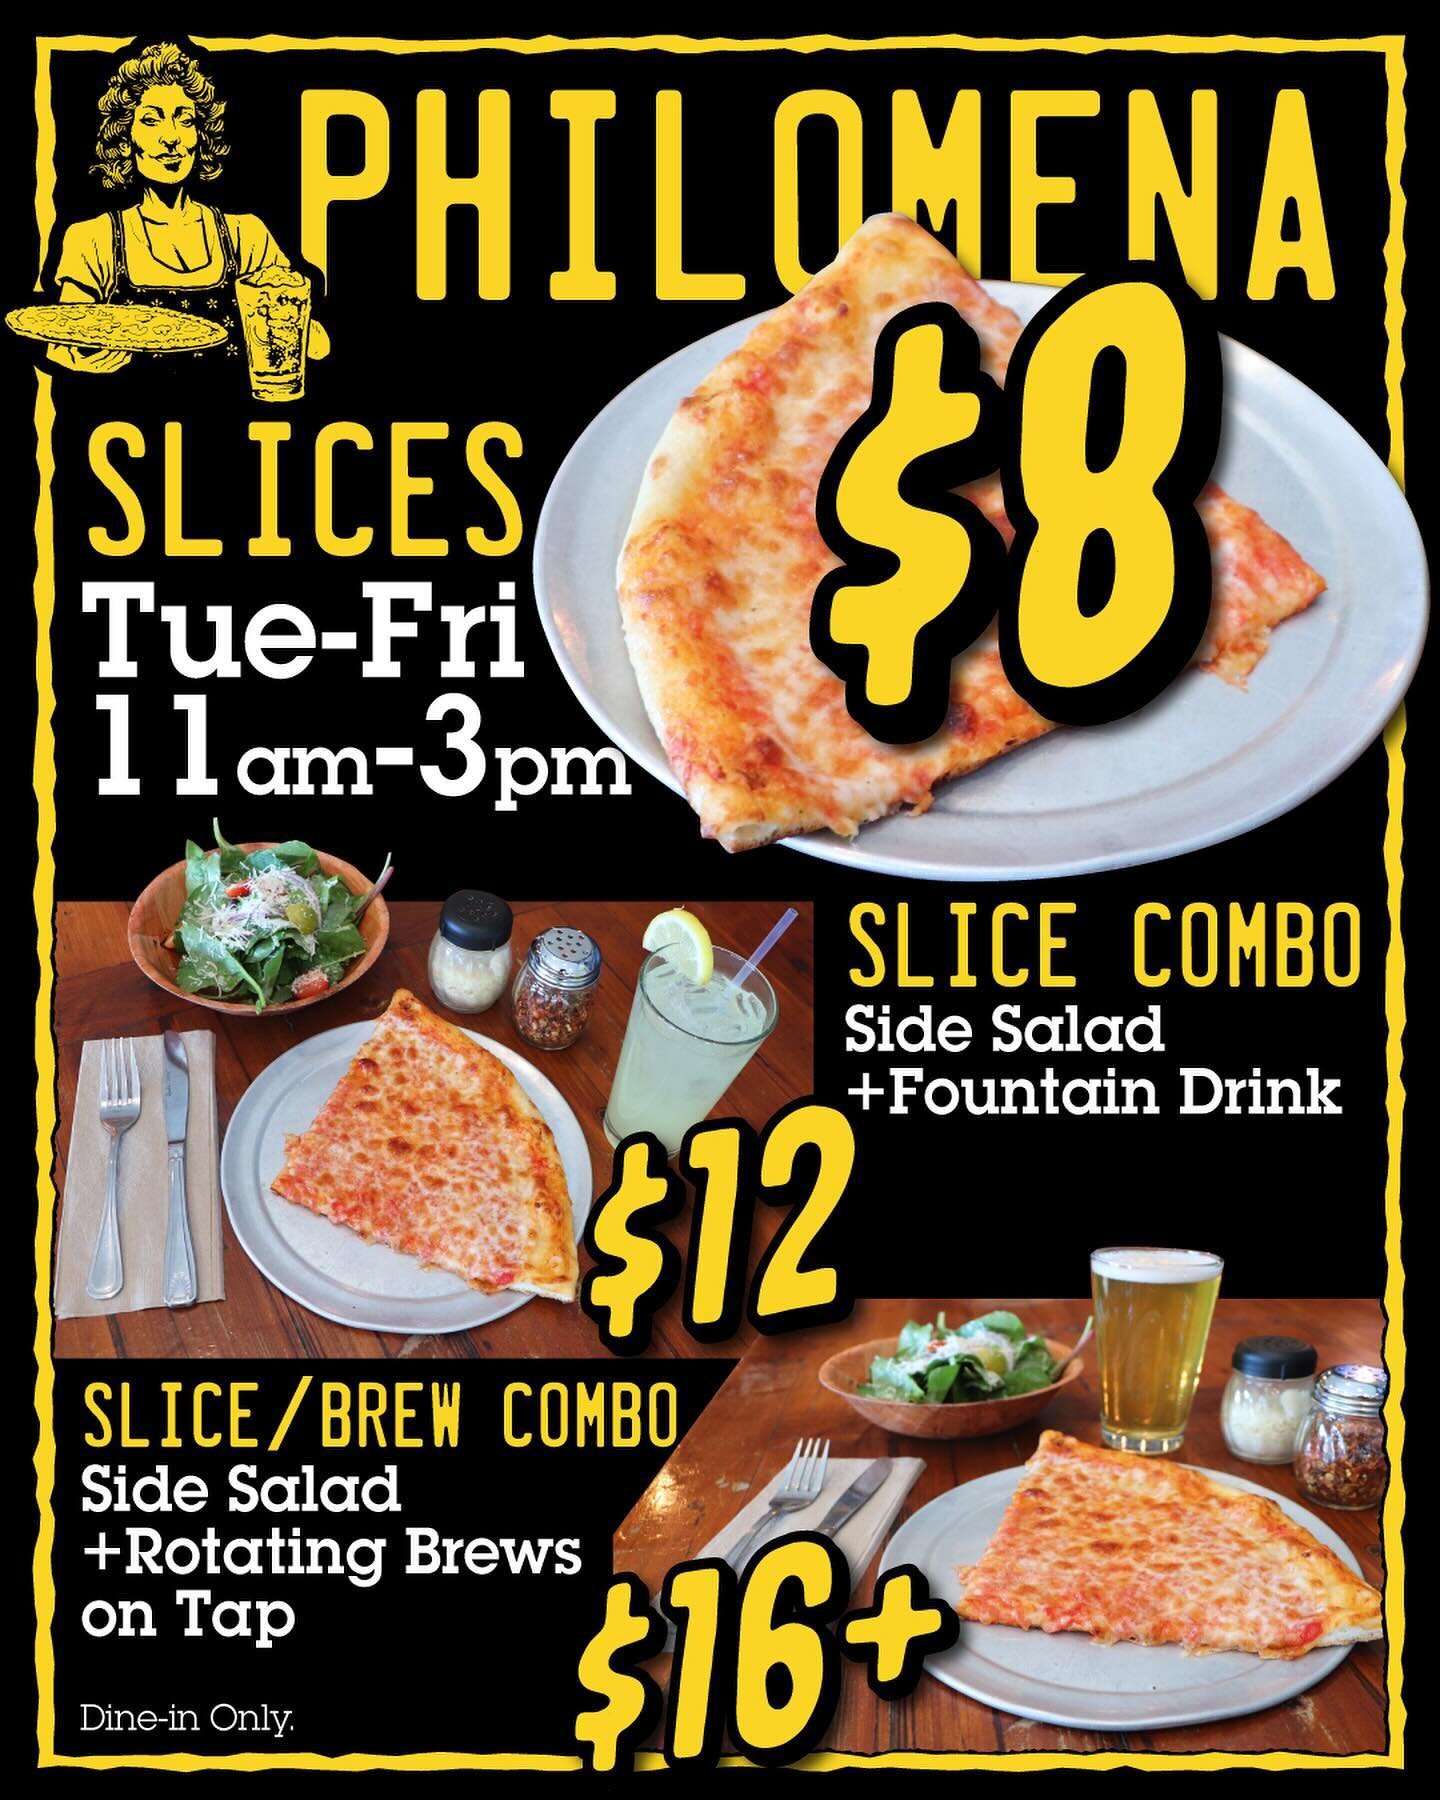 By popular demand: SLICES! 
Get your combo Tue-Fri 11am-3pm
Add toppings for extra.

#Oaklandbrunchclub #oaklandbrunchies #oaklandrestaurants #oaklandrain #eastbaybrunch #oaklandfoodies #beerbrunch #eastbaysoccer #sunnysideofthebay #brunchpizza #oakl